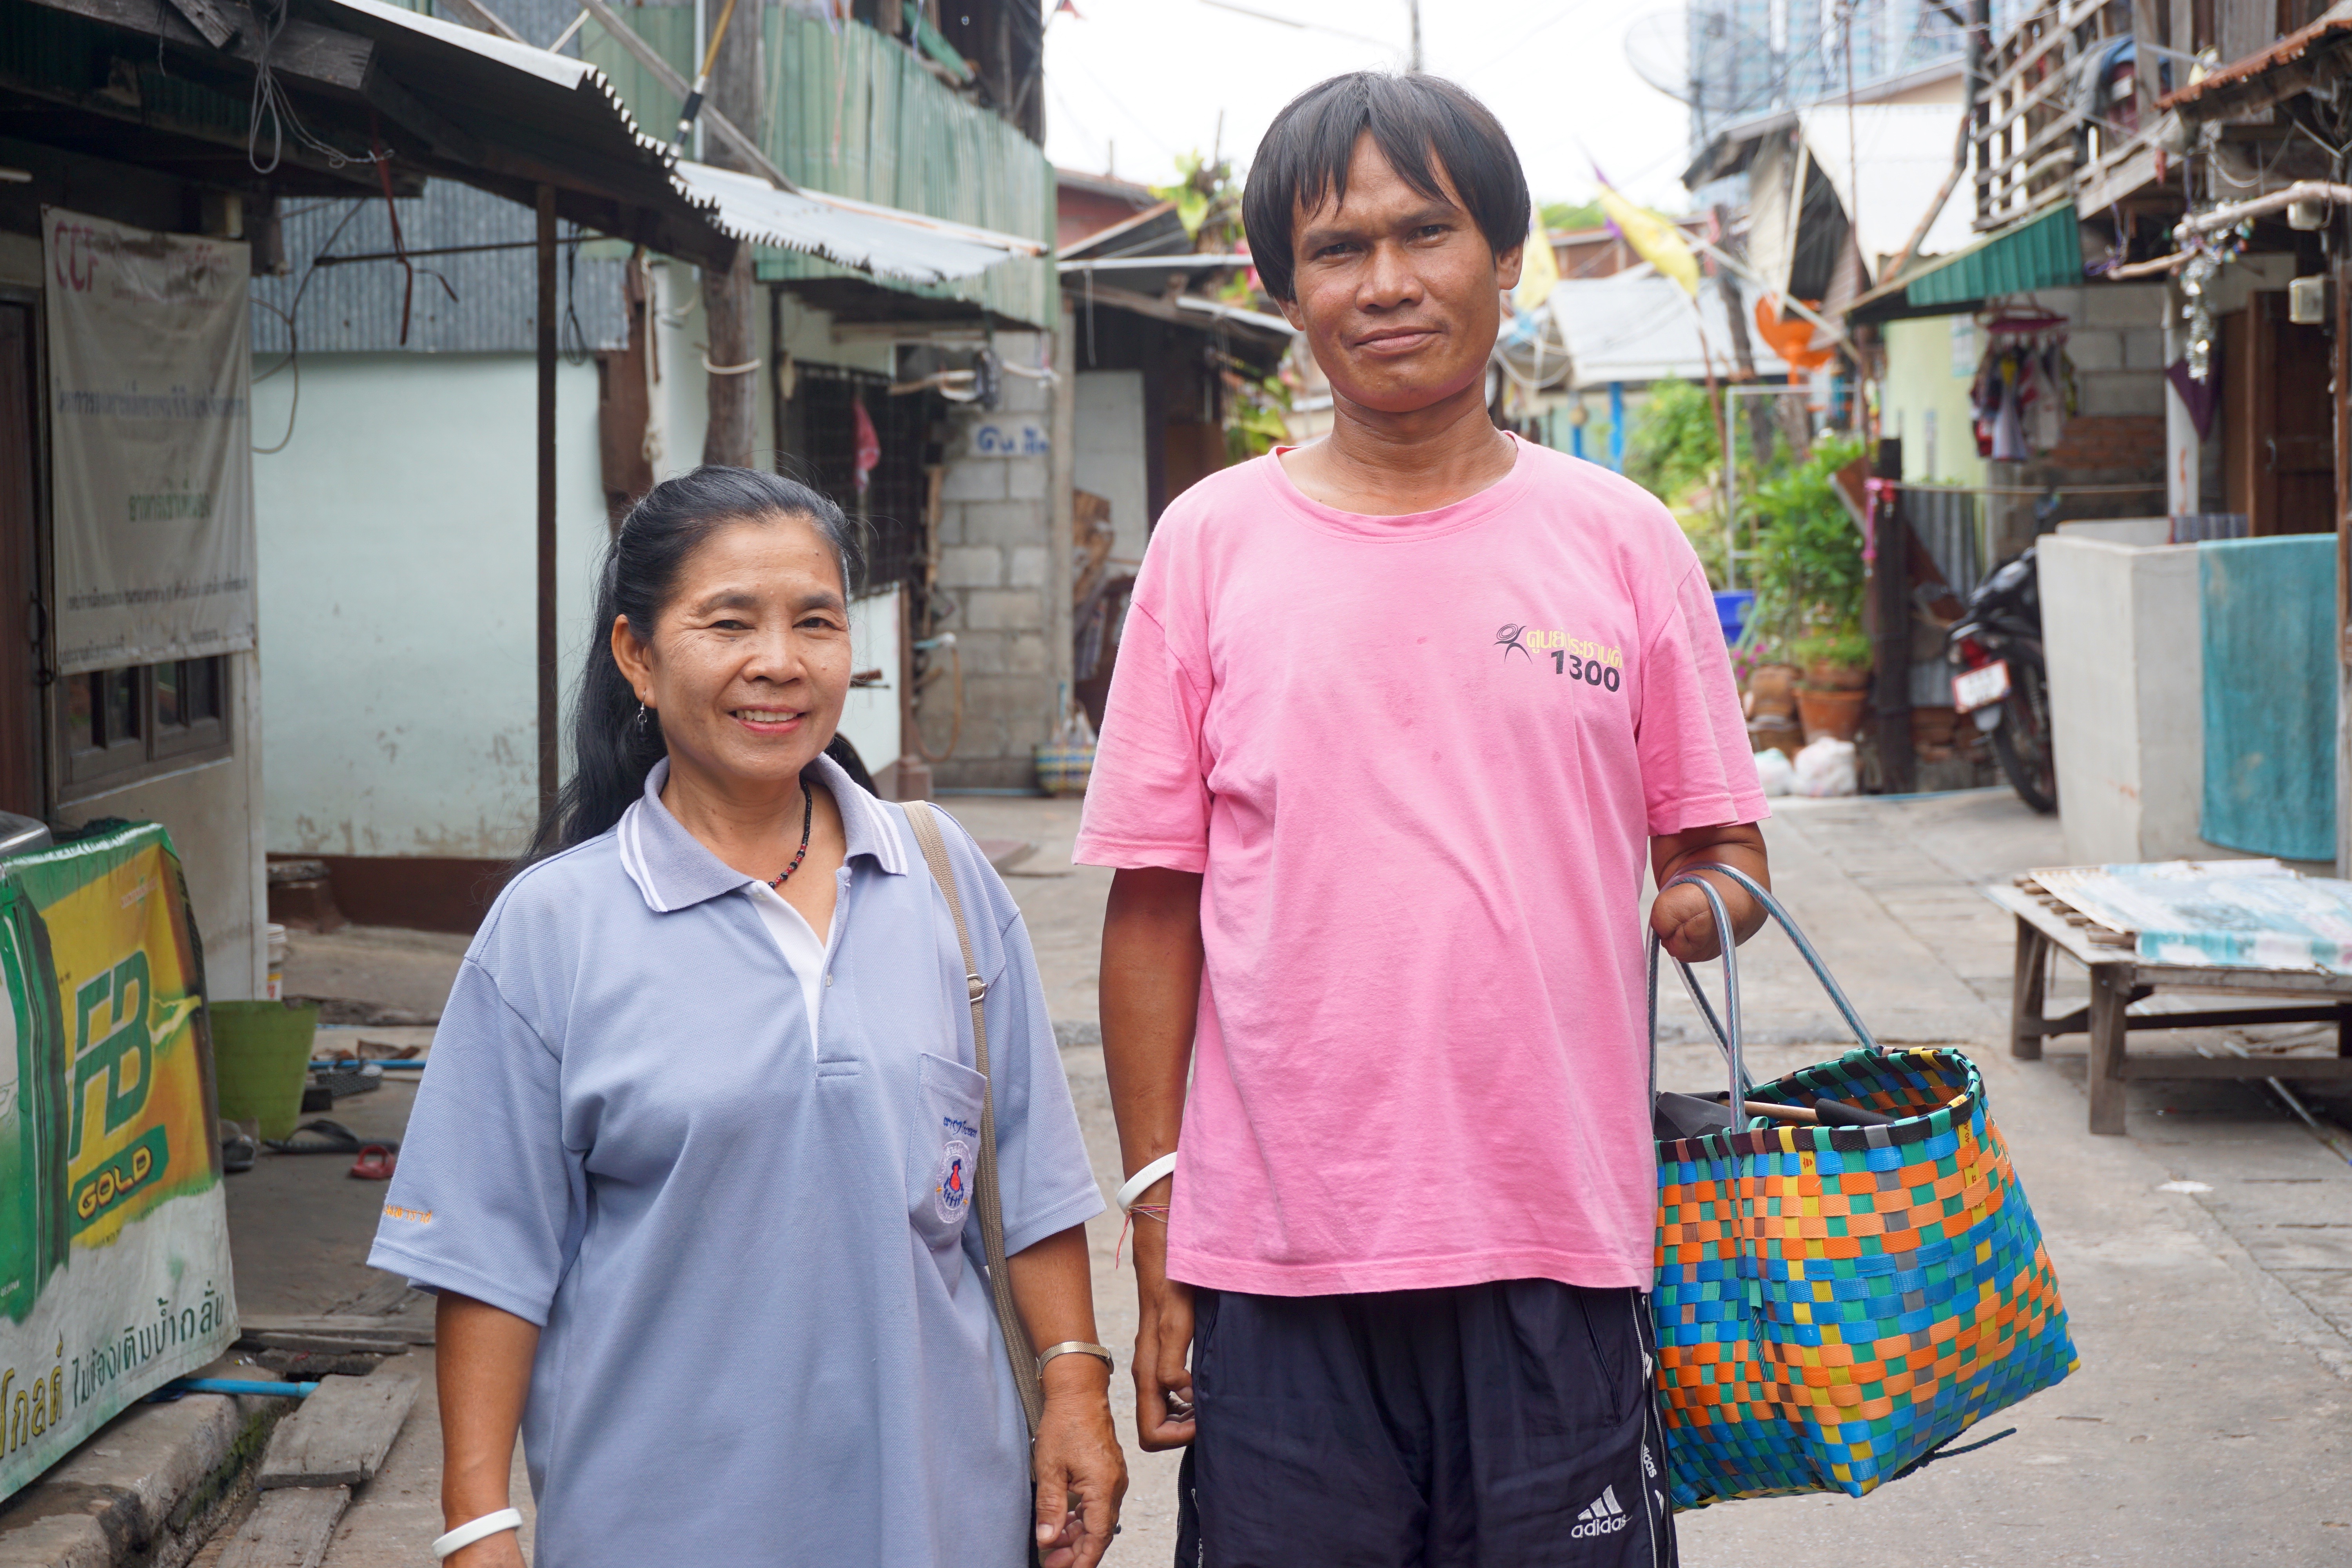 The United Nations reports that the Thai government, in response to the country’s aging population, has started to provide social welfare assistance of 300 baht per month to older persons having an annual income of less than 10,000 baht. With many of their patients over the age of 60, Uthumporn Srichai and Amphon Phosanit address caring for an impoverished, aging population through alternative means.